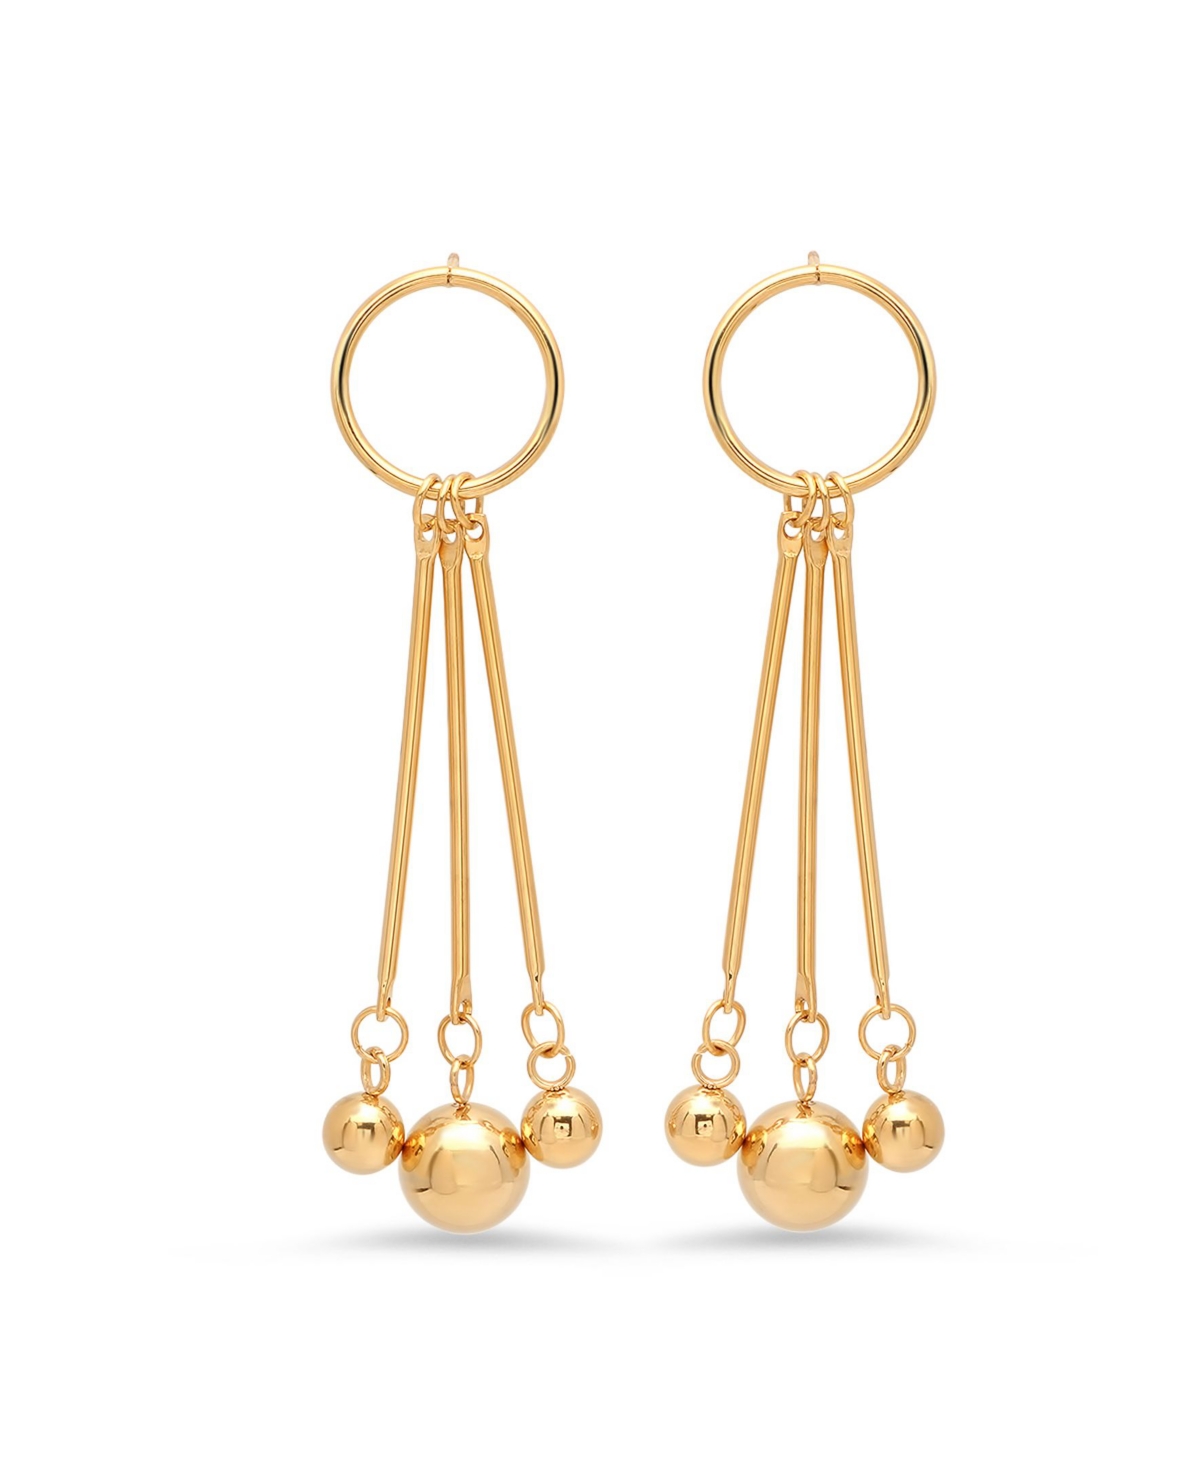 Ladies 18K Micron Gold Plated Stainless Steel Circle Drop Earrings - Gold-Plated